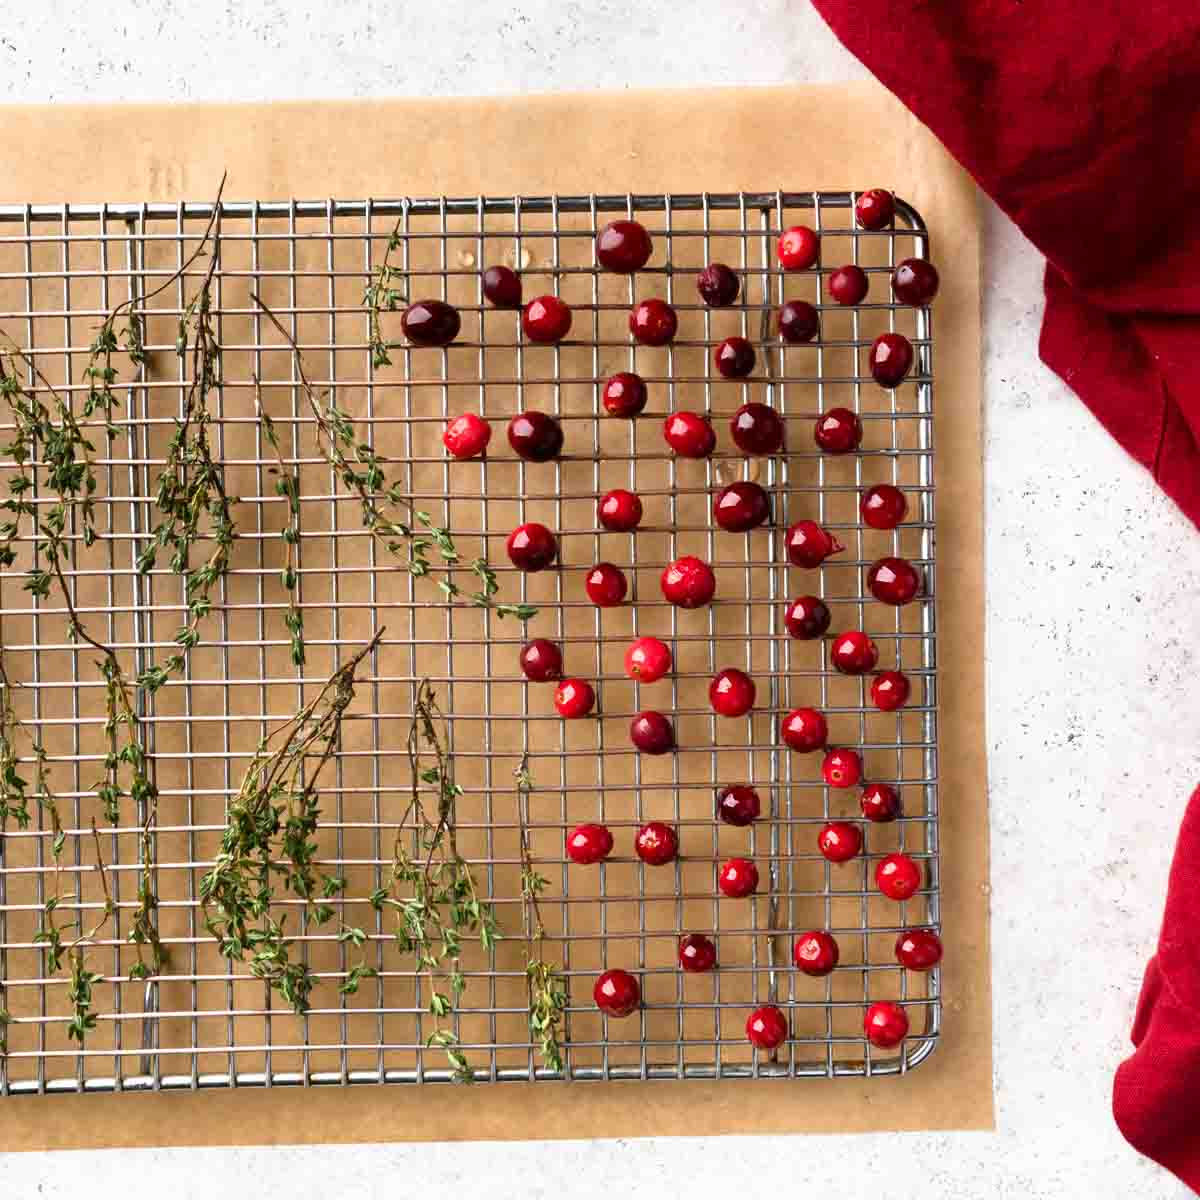 Simple syrup glazed cranberries and thyme sprigs drying on a wire rack.